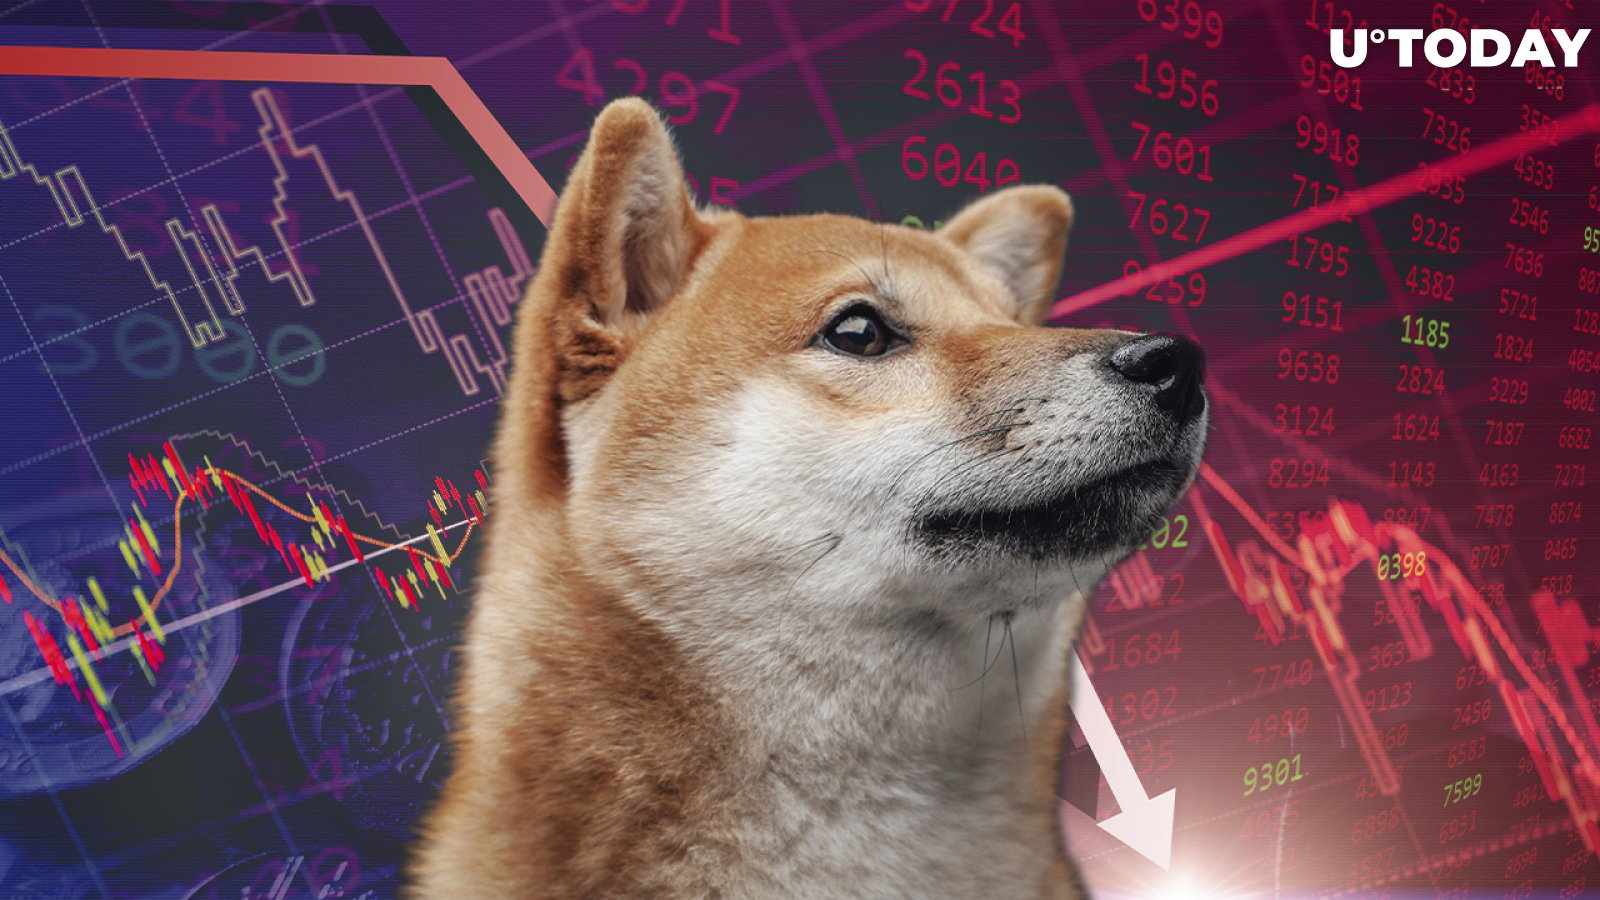 Shiba Inu Drops Below Dogecoin and AVAX on List of Top Coins and Tokens by Market Capitalization